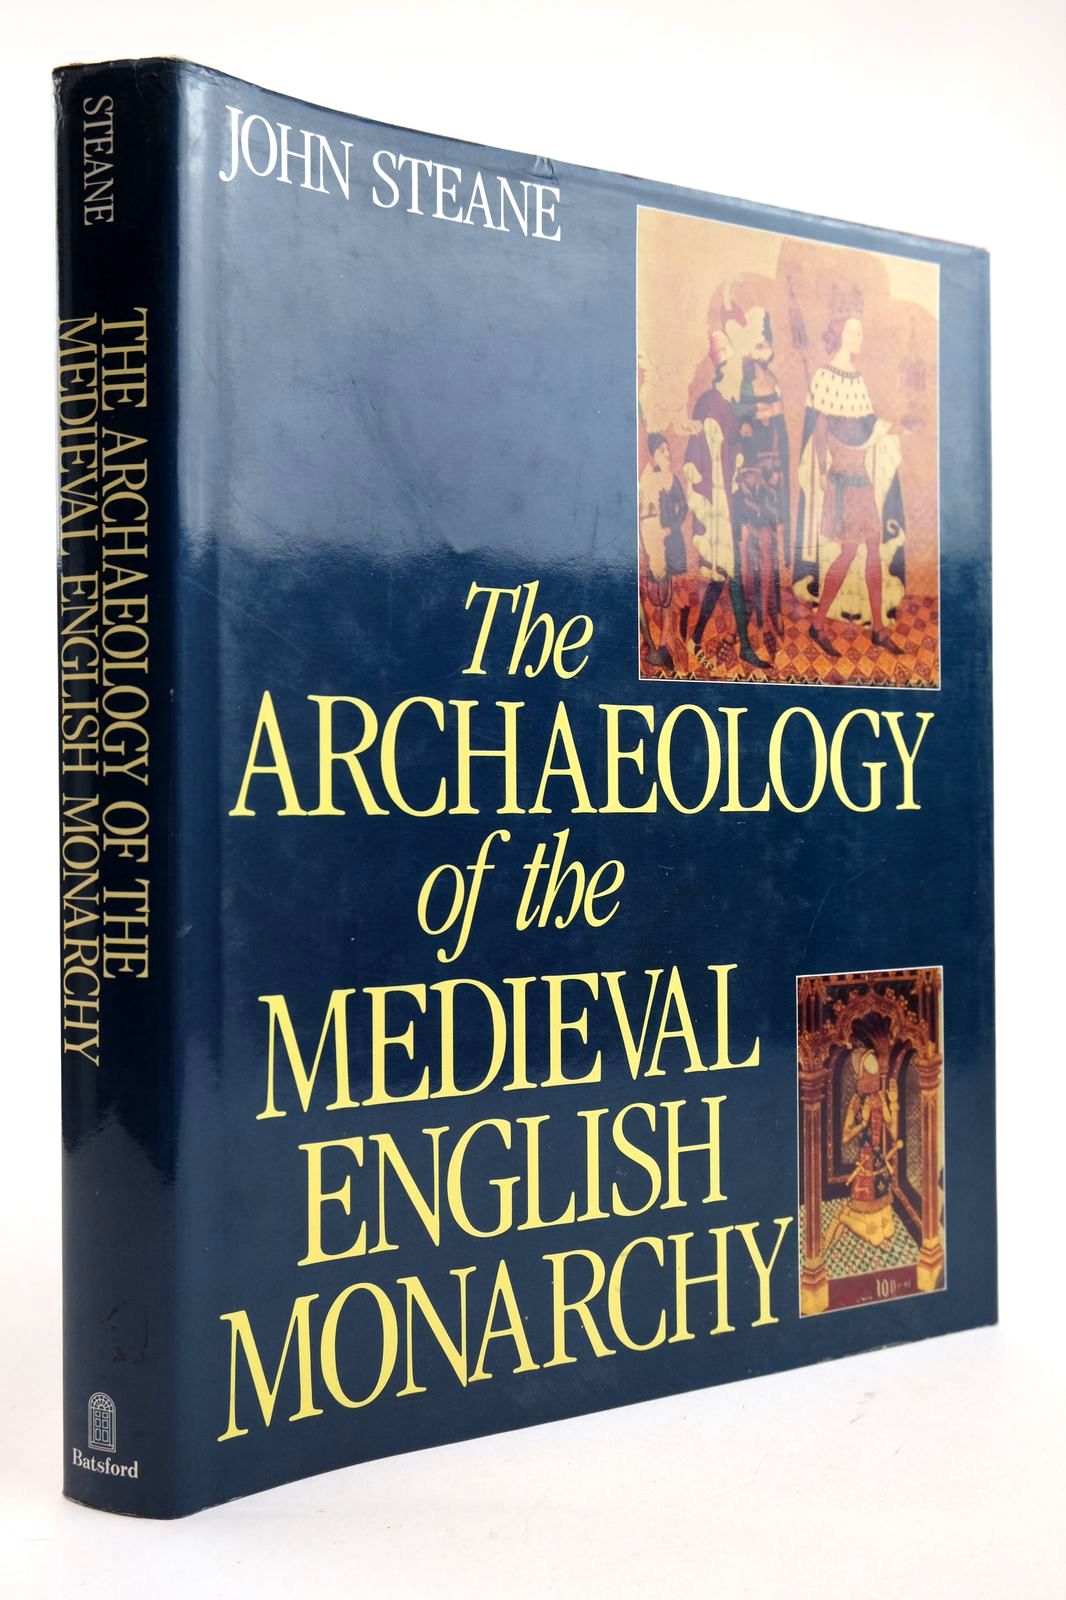 Photo of THE ARCHAEOLOGY OF THE MEDIEVAL ENGLISH MONARCHY written by Steane, John published by B.T. Batsford Ltd. (STOCK CODE: 2132592)  for sale by Stella & Rose's Books